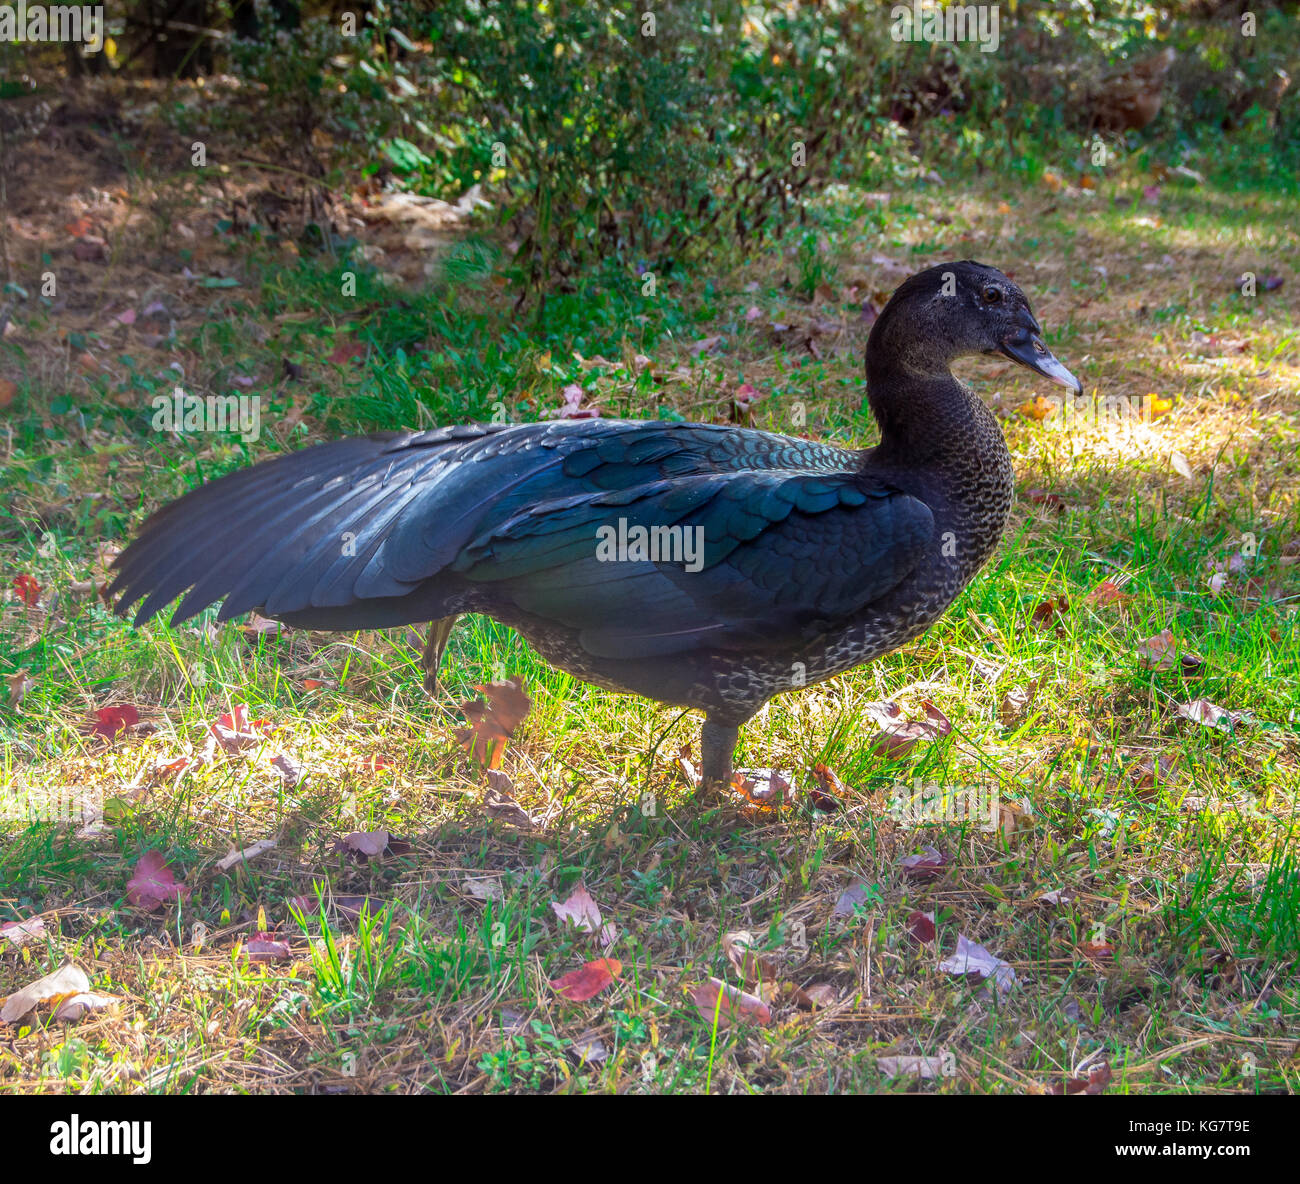 A black muscovy duck stretches Stock Photo